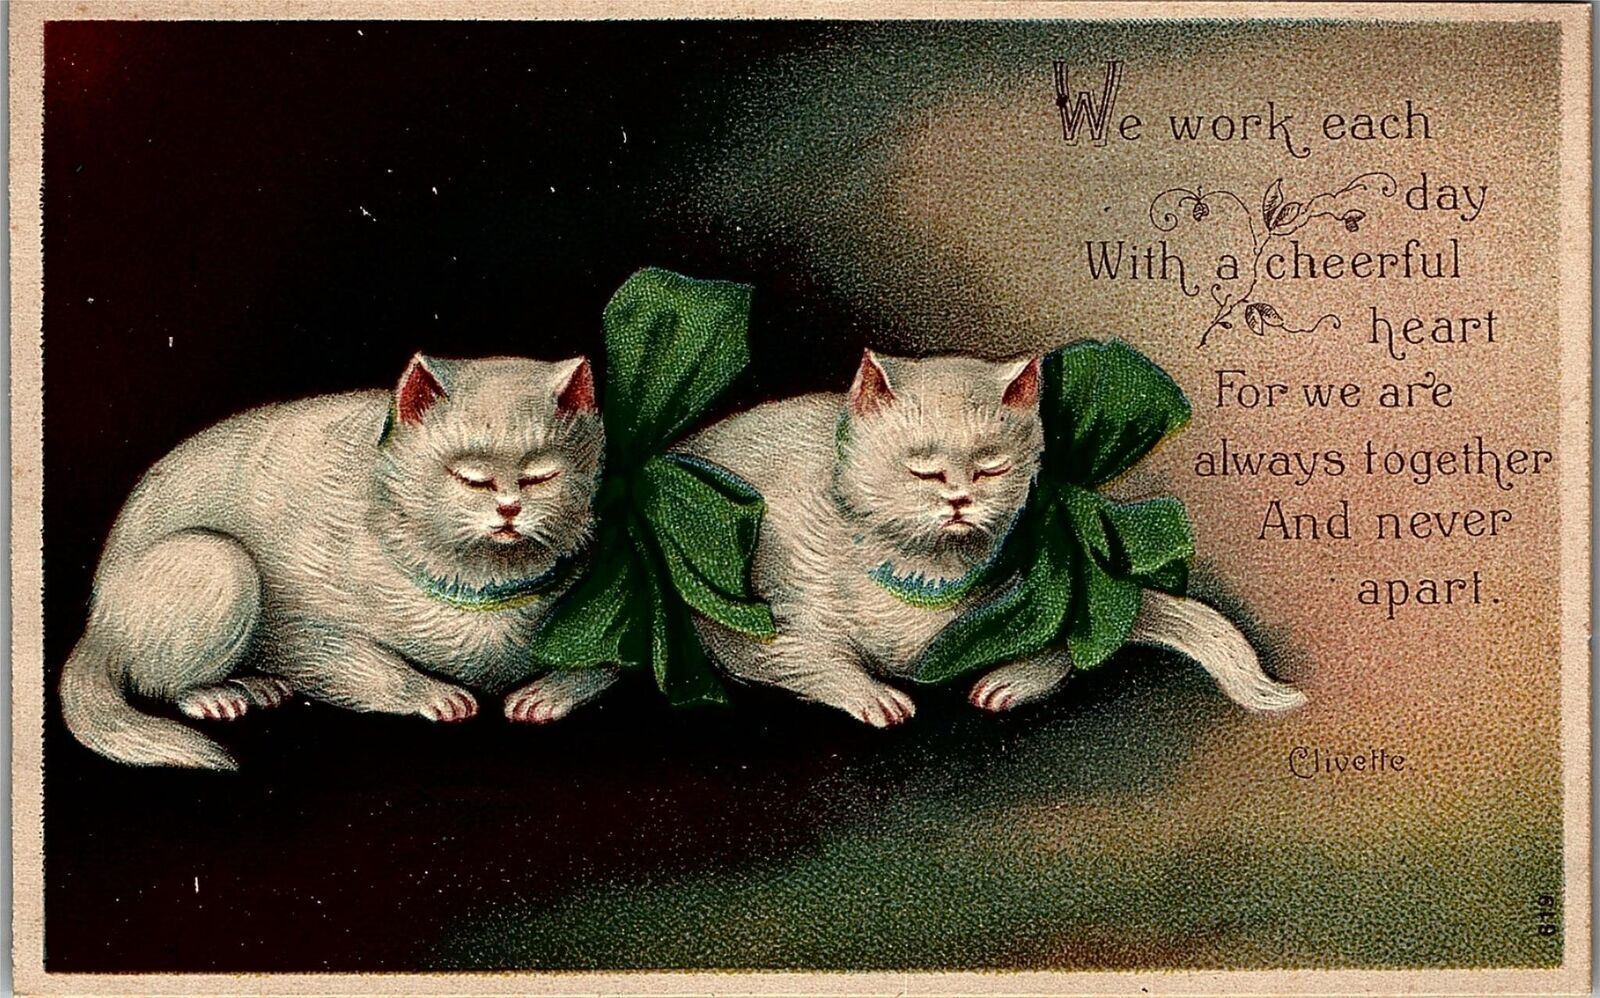 c1909 SIGNED CLIVETTE DANCING CATS POSTCARDS, WHITE CATS, POEM, GREEN BOWS 39-85